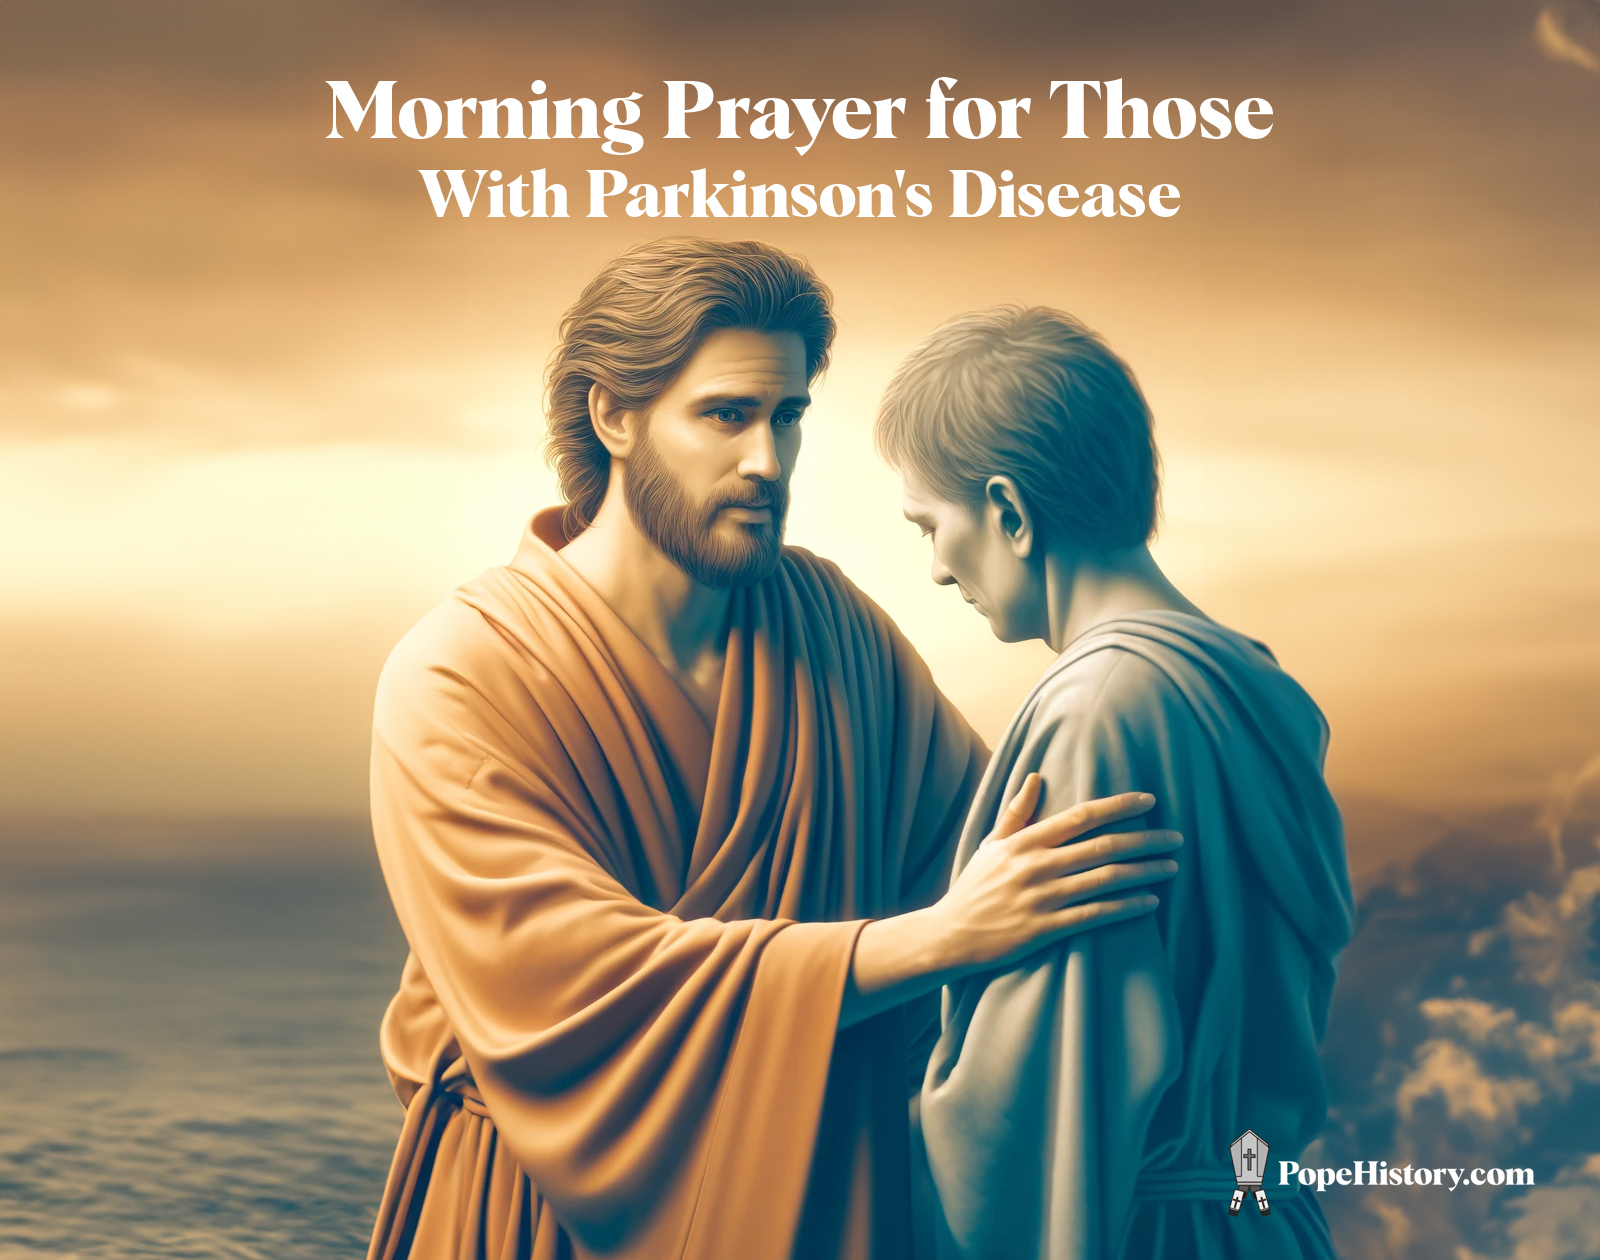 Jesus standing with a parkinson disease